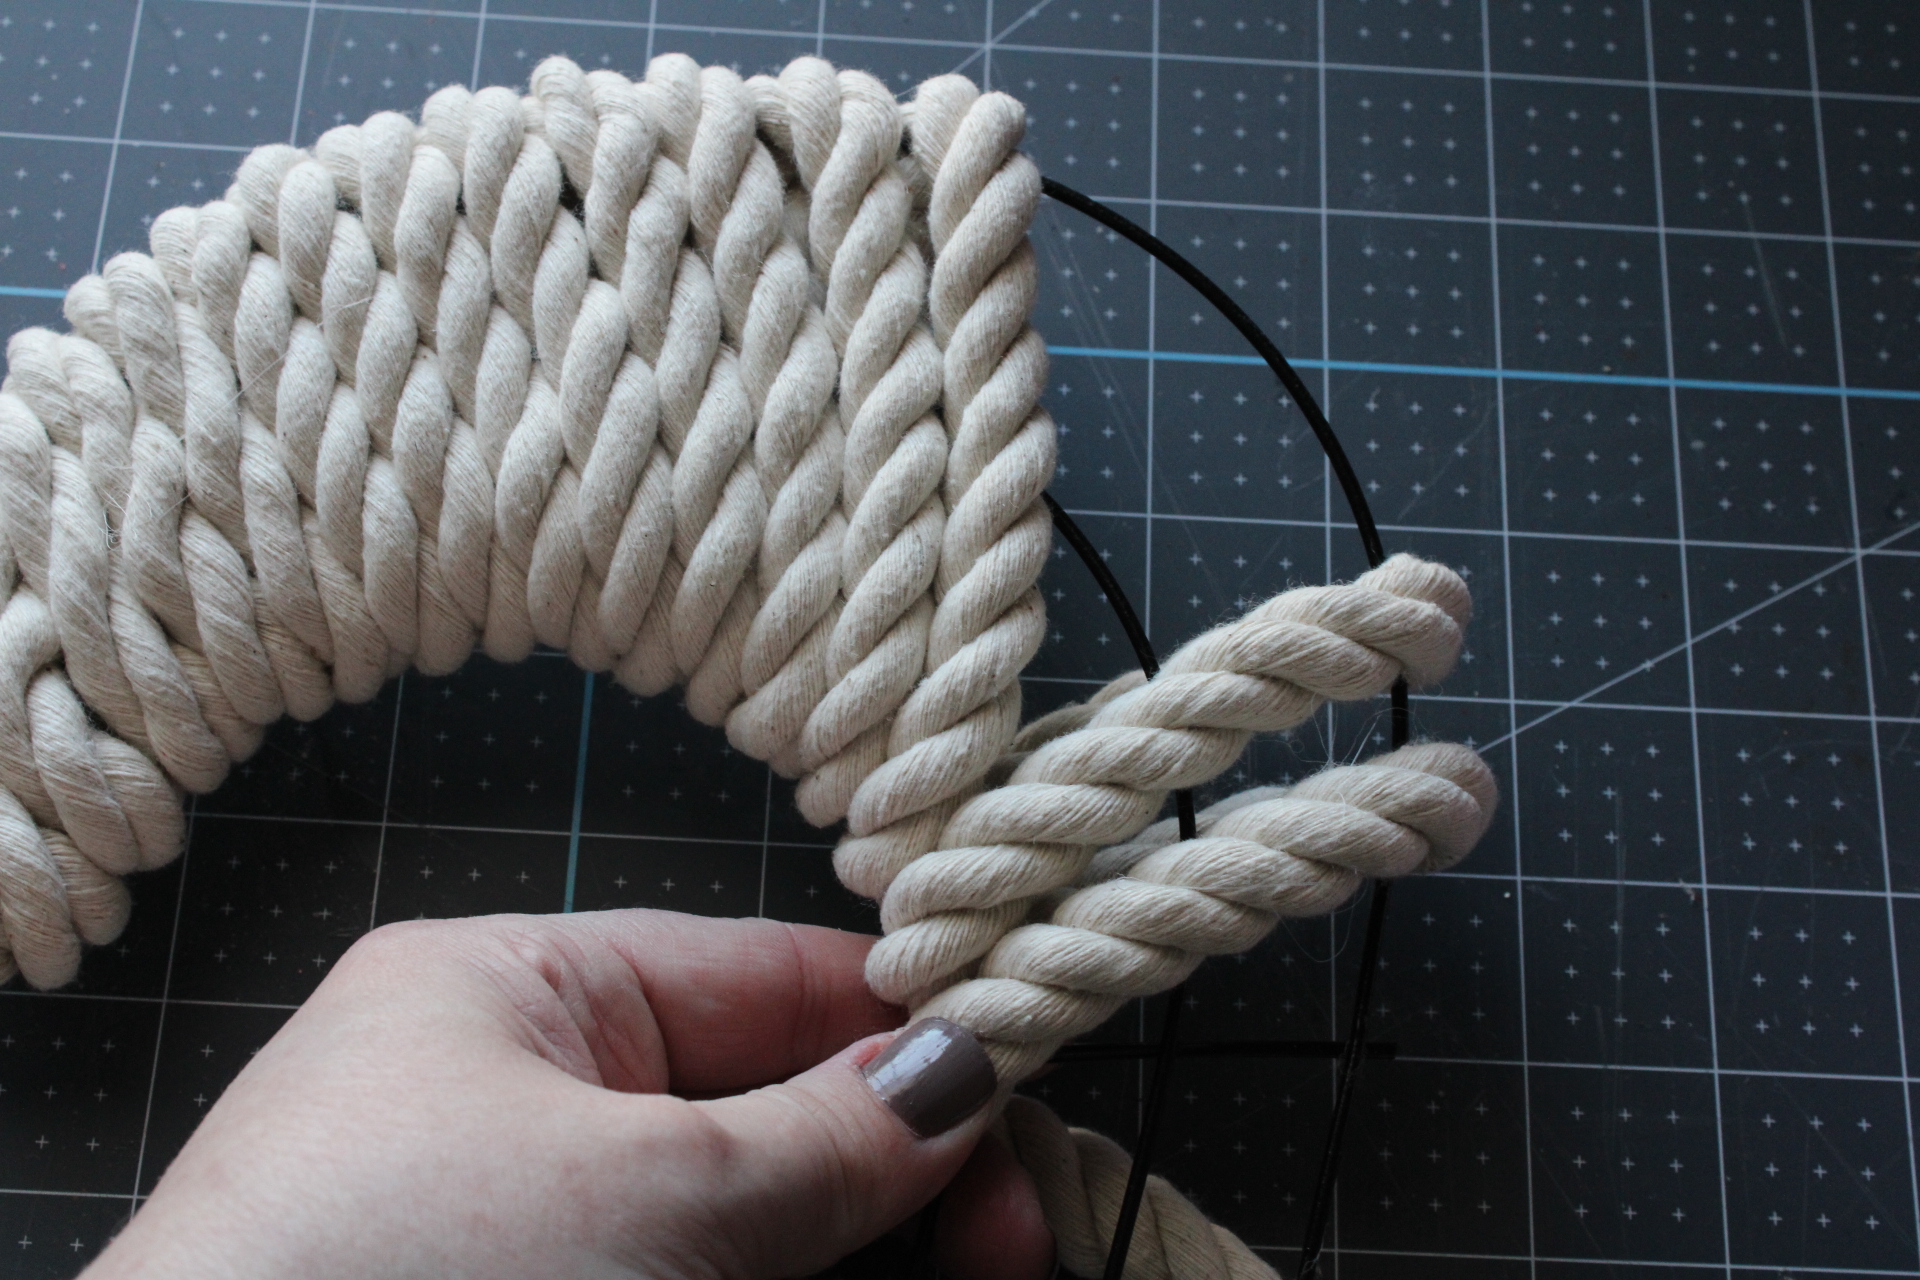 Showing how to skip sections of the heart rope wreath to keep the rope from overlapping in the inner part of one of the arches.